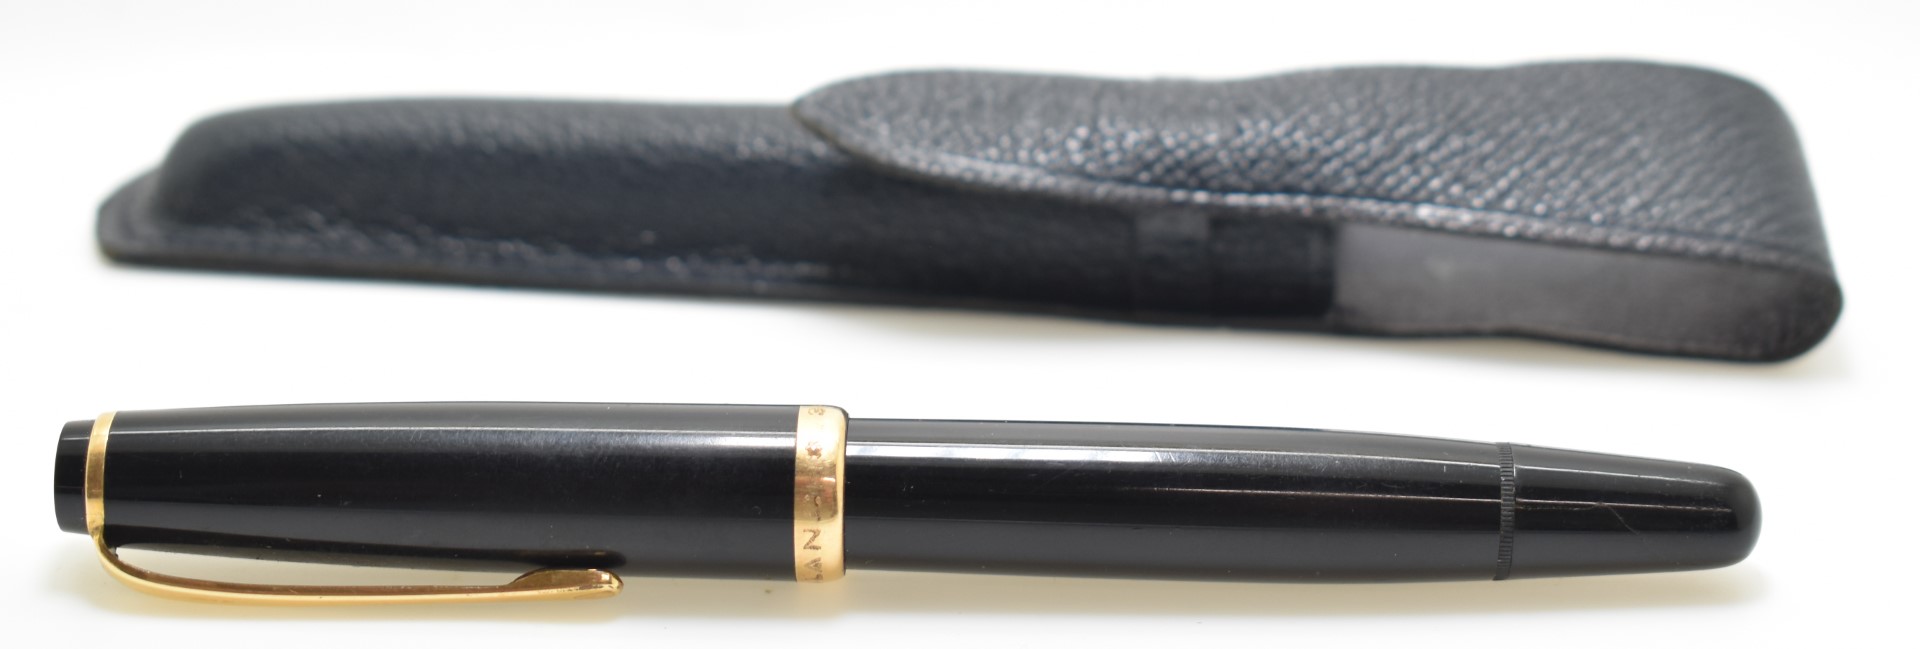 Montblanc 342 fountain pen with number 2 nib, black resin body and gold plated fittings, in original